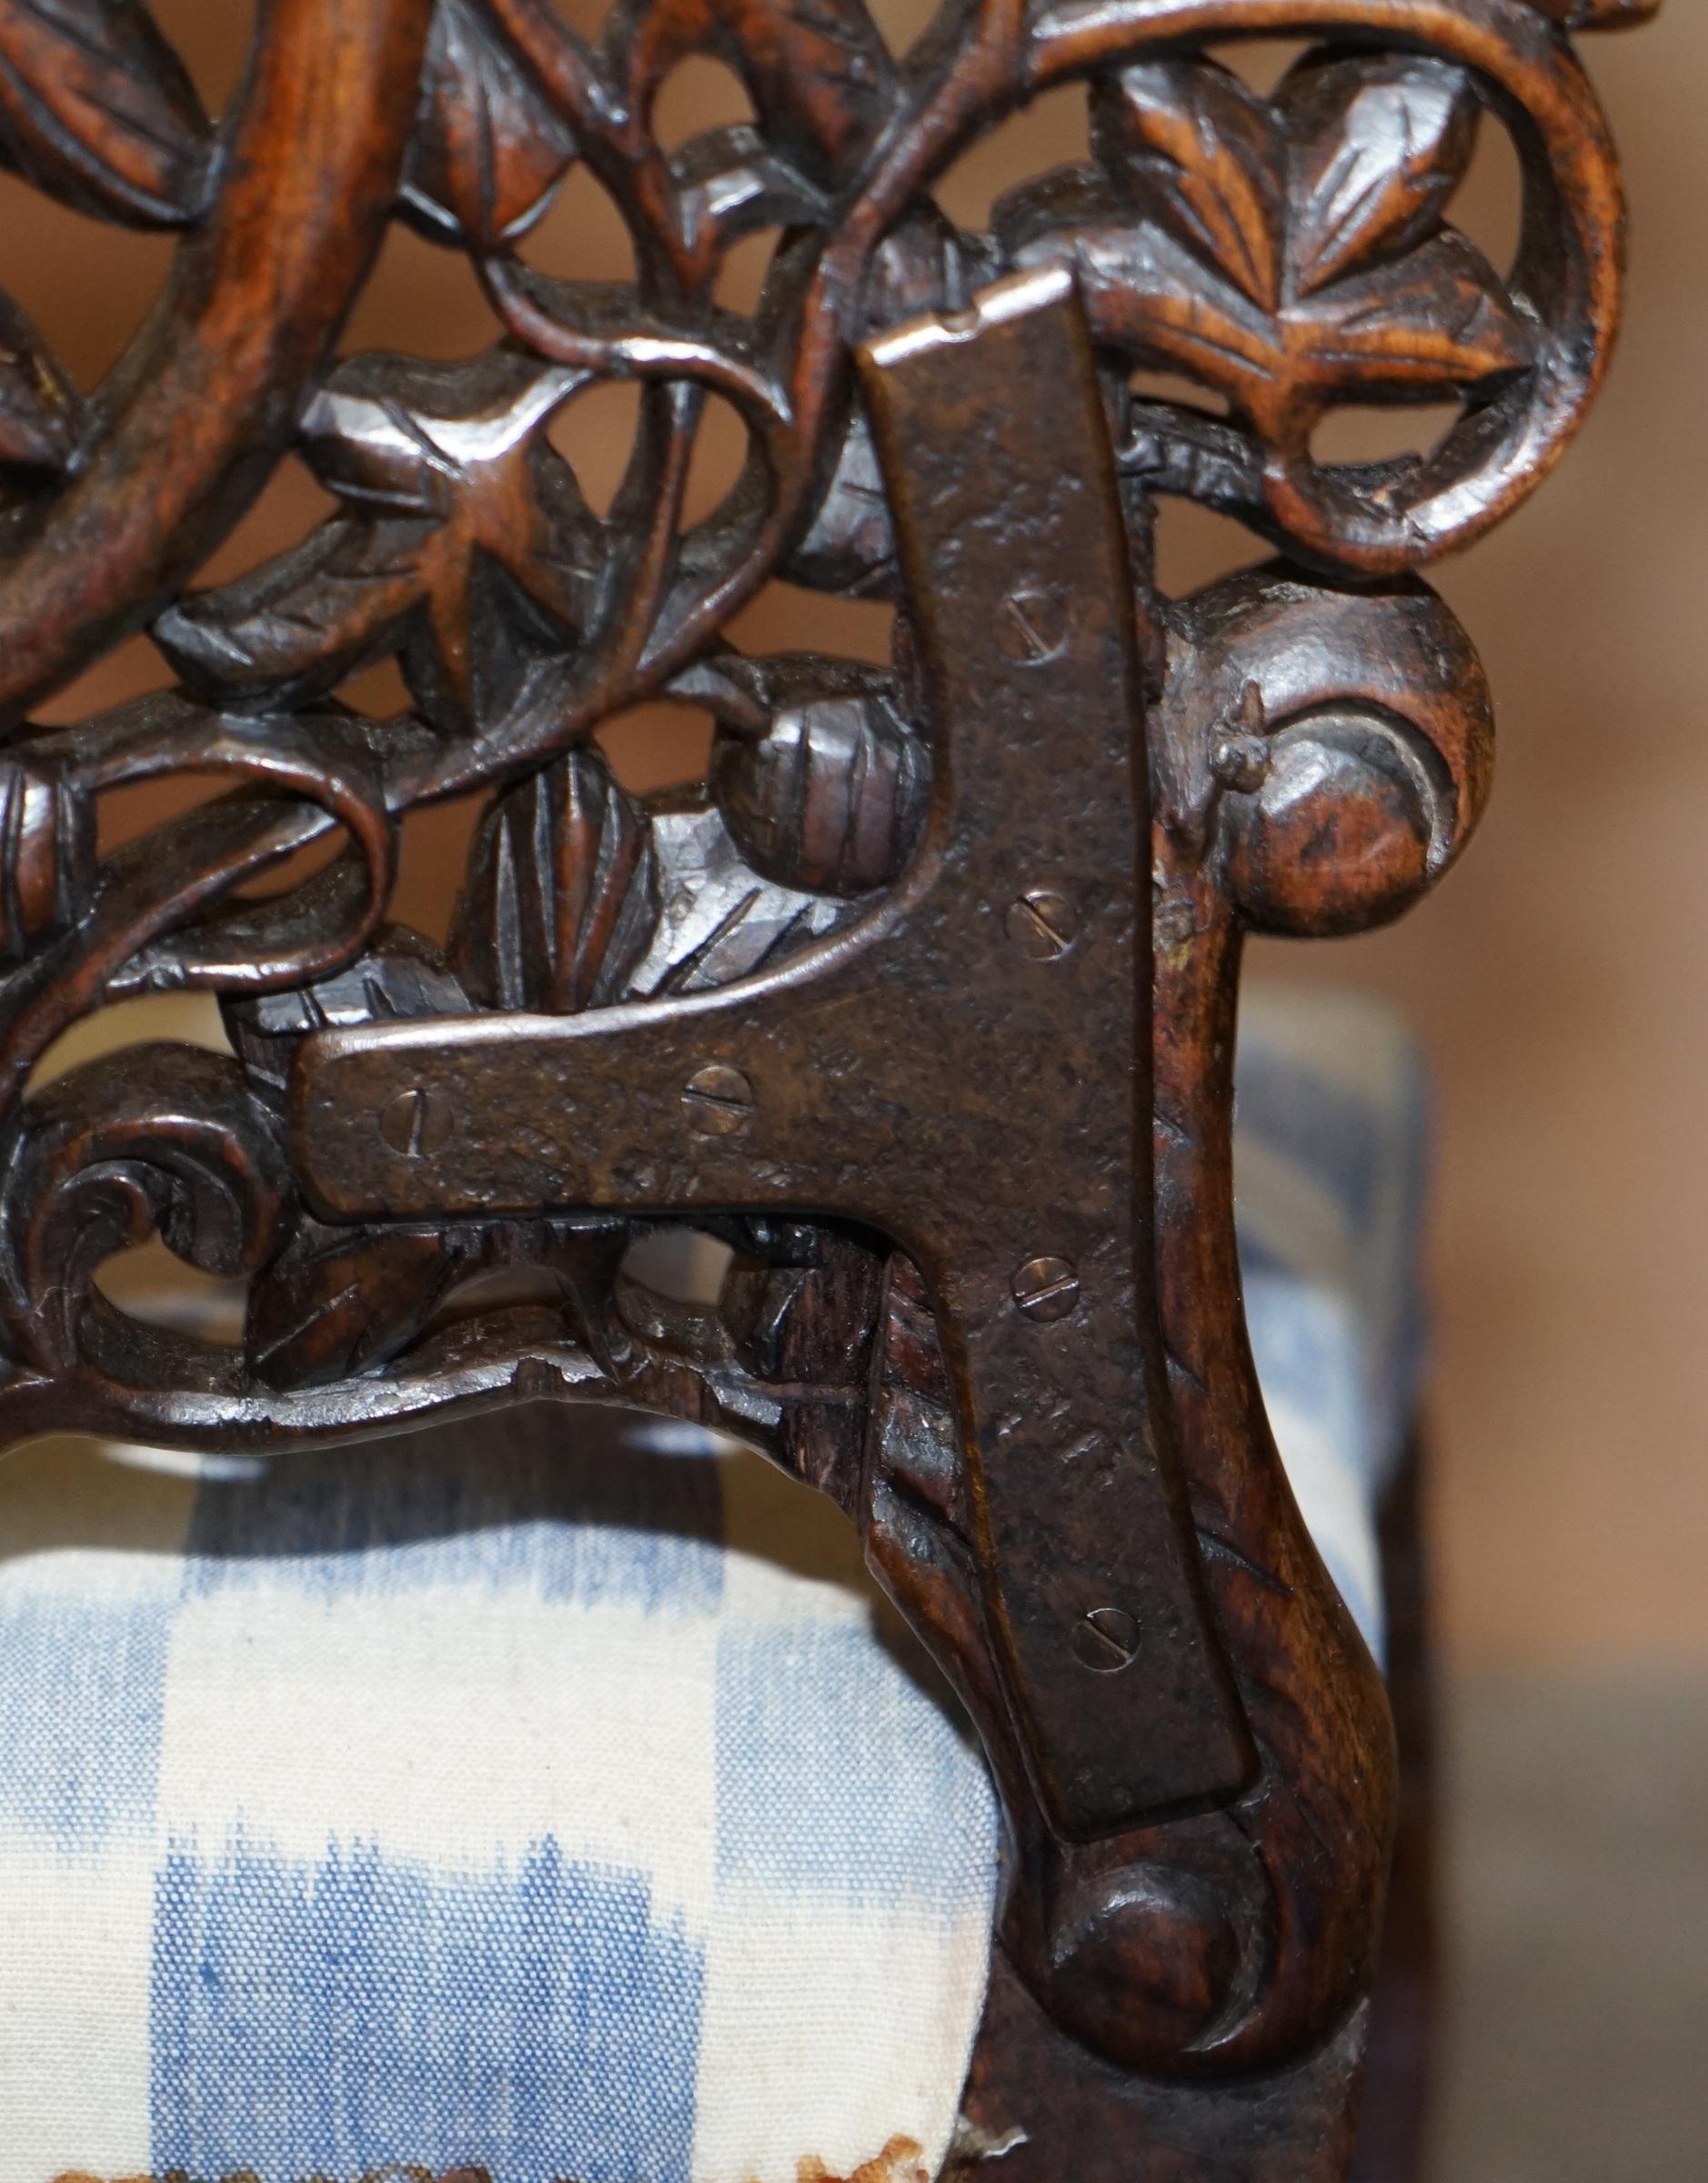 Lovely Hardwood Hand Carved Anglo Indian Burmese Chair with Floral Detailing For Sale 11